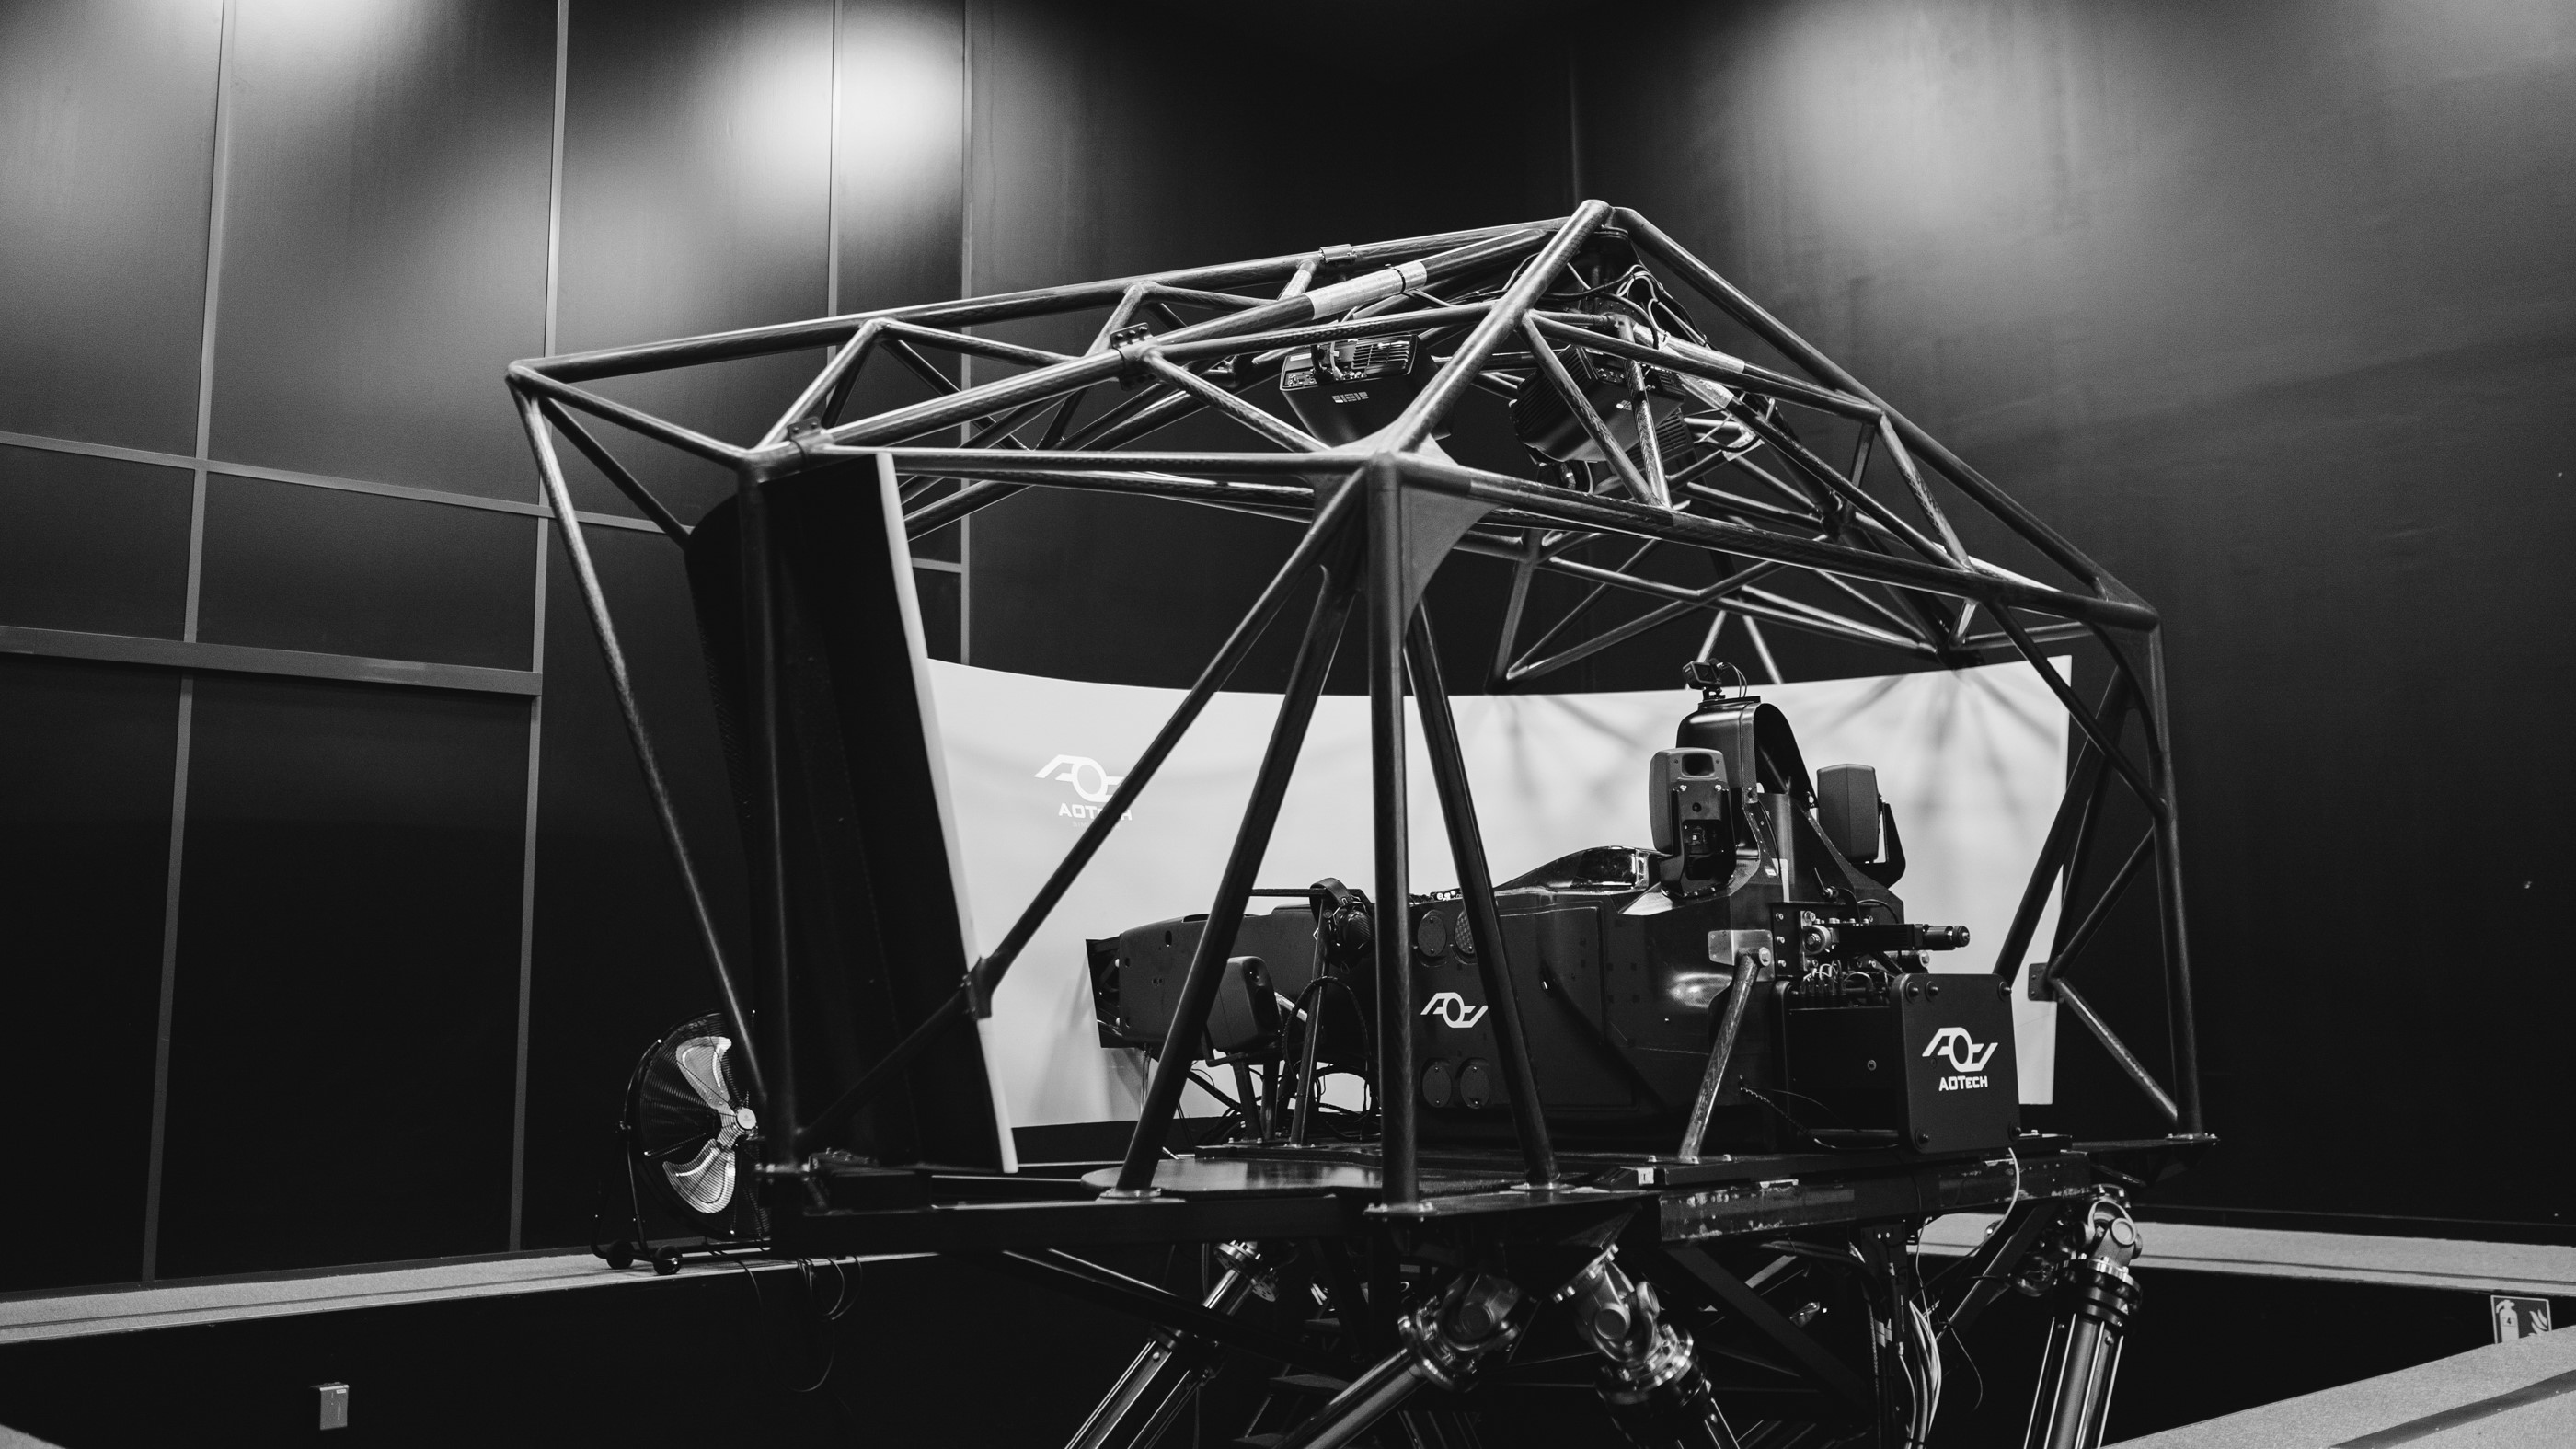 The platform dynamics are undoubtedly a strong point of the simulation. By designing and constructing its own suspended structure, AOTech has developed technical solutions that deeply immerse drivers in the virtual environment and enhance the simulator's performance.